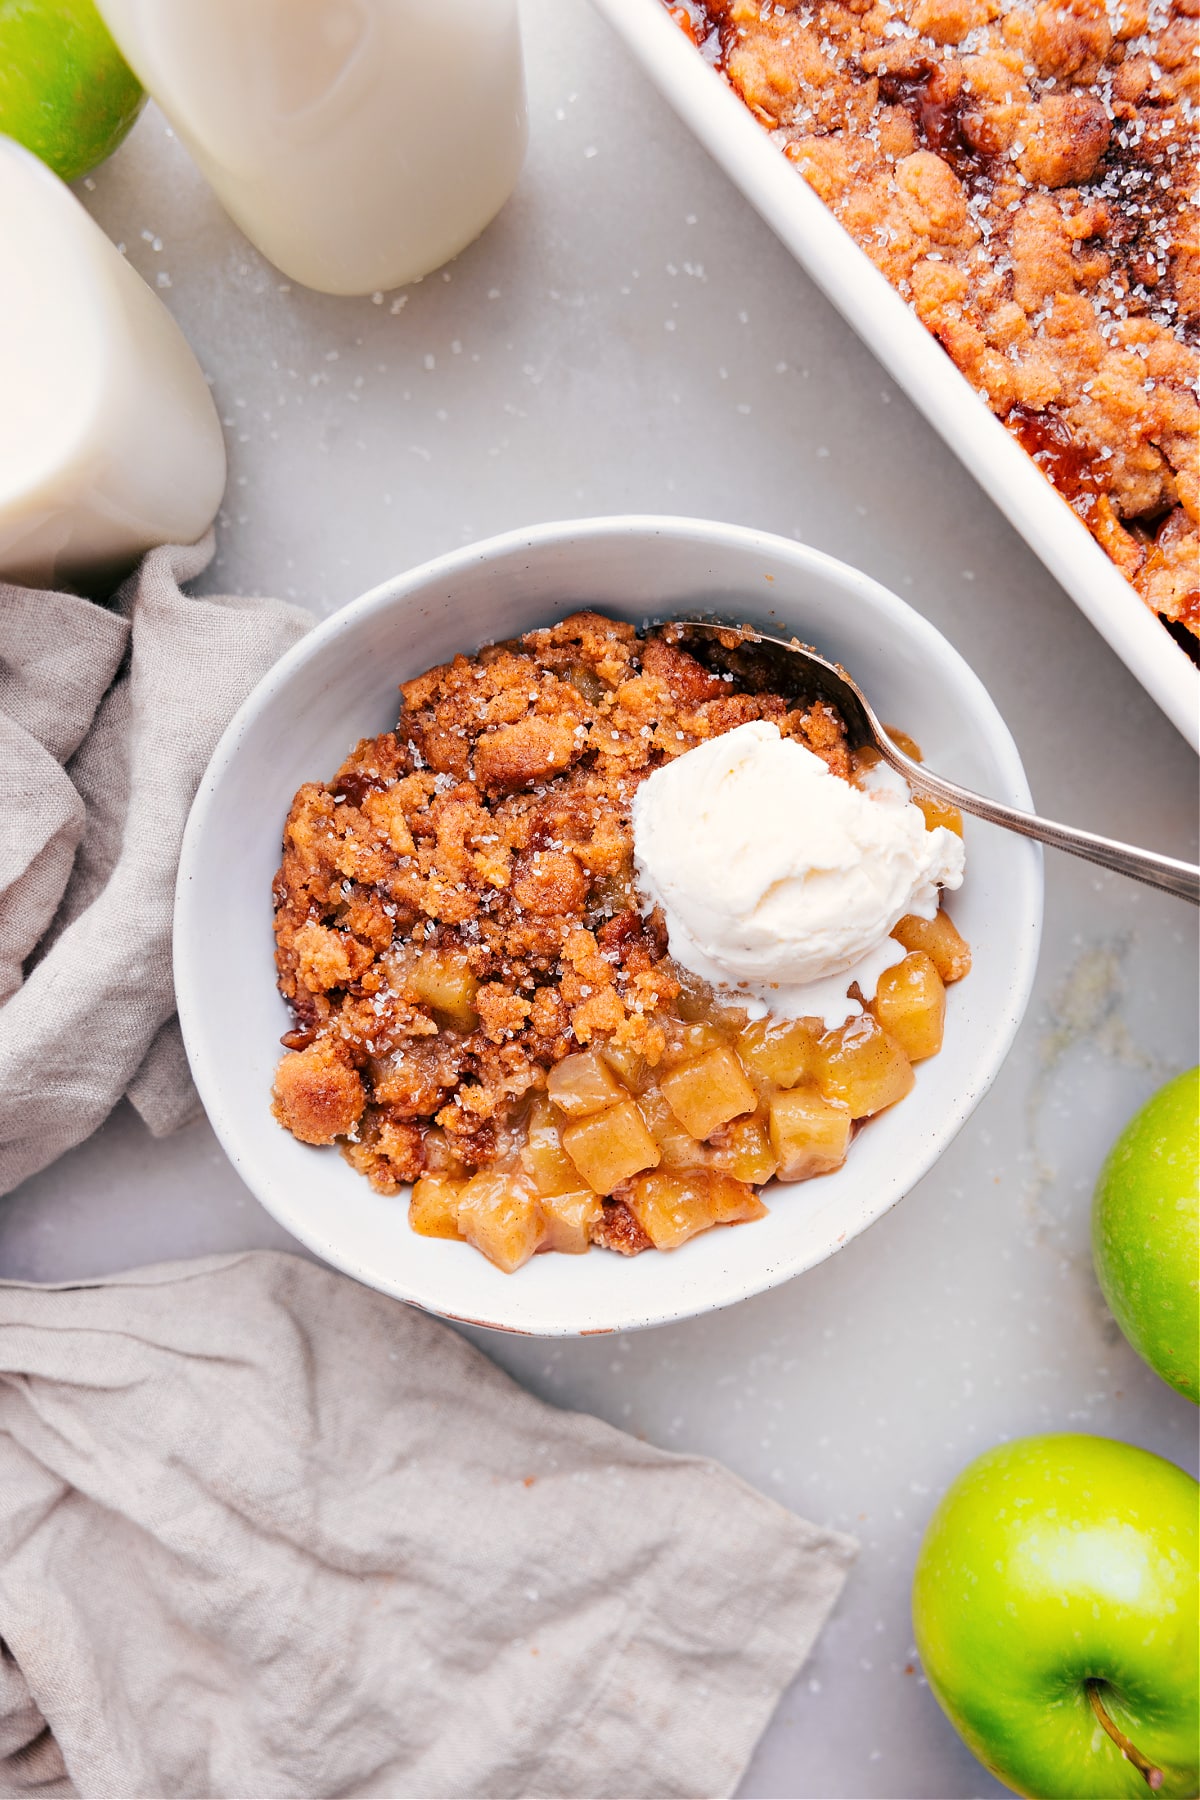 Apple cobbler with a scoop of ice cream in a bowl with a spoon.